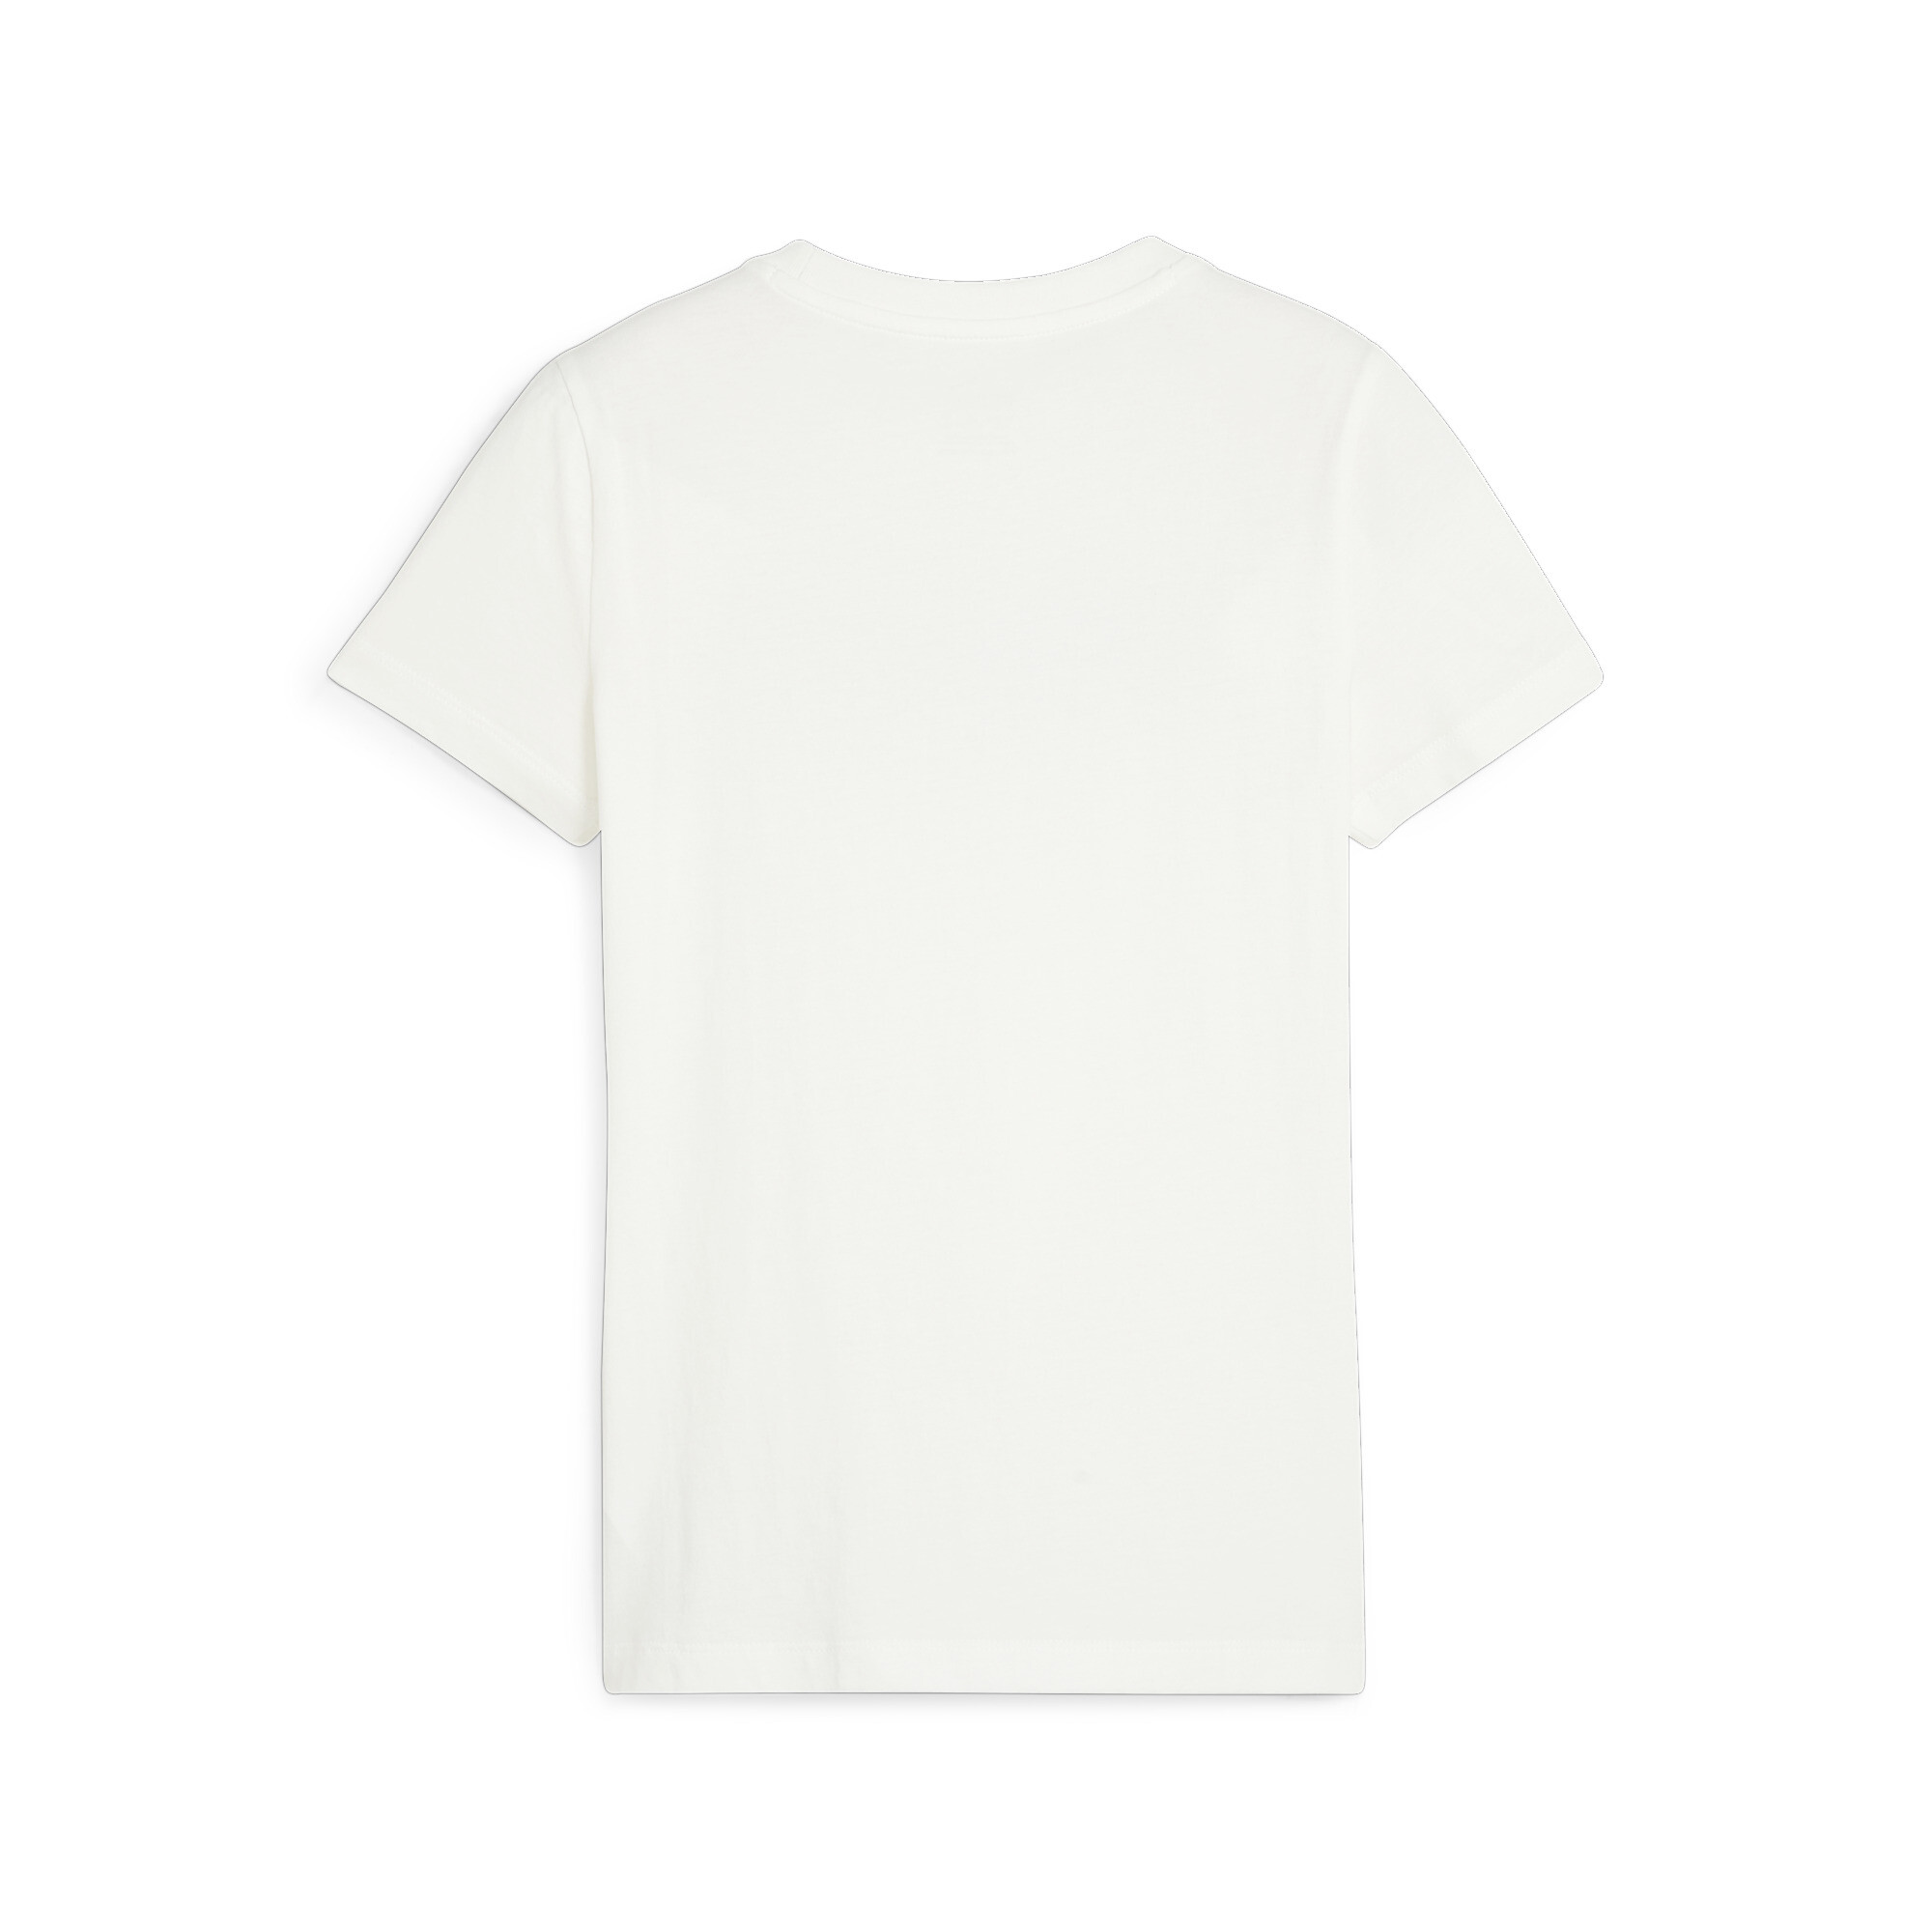 PUMA SQUAD Graphic T-Shirt In White, Size 7-8 Youth